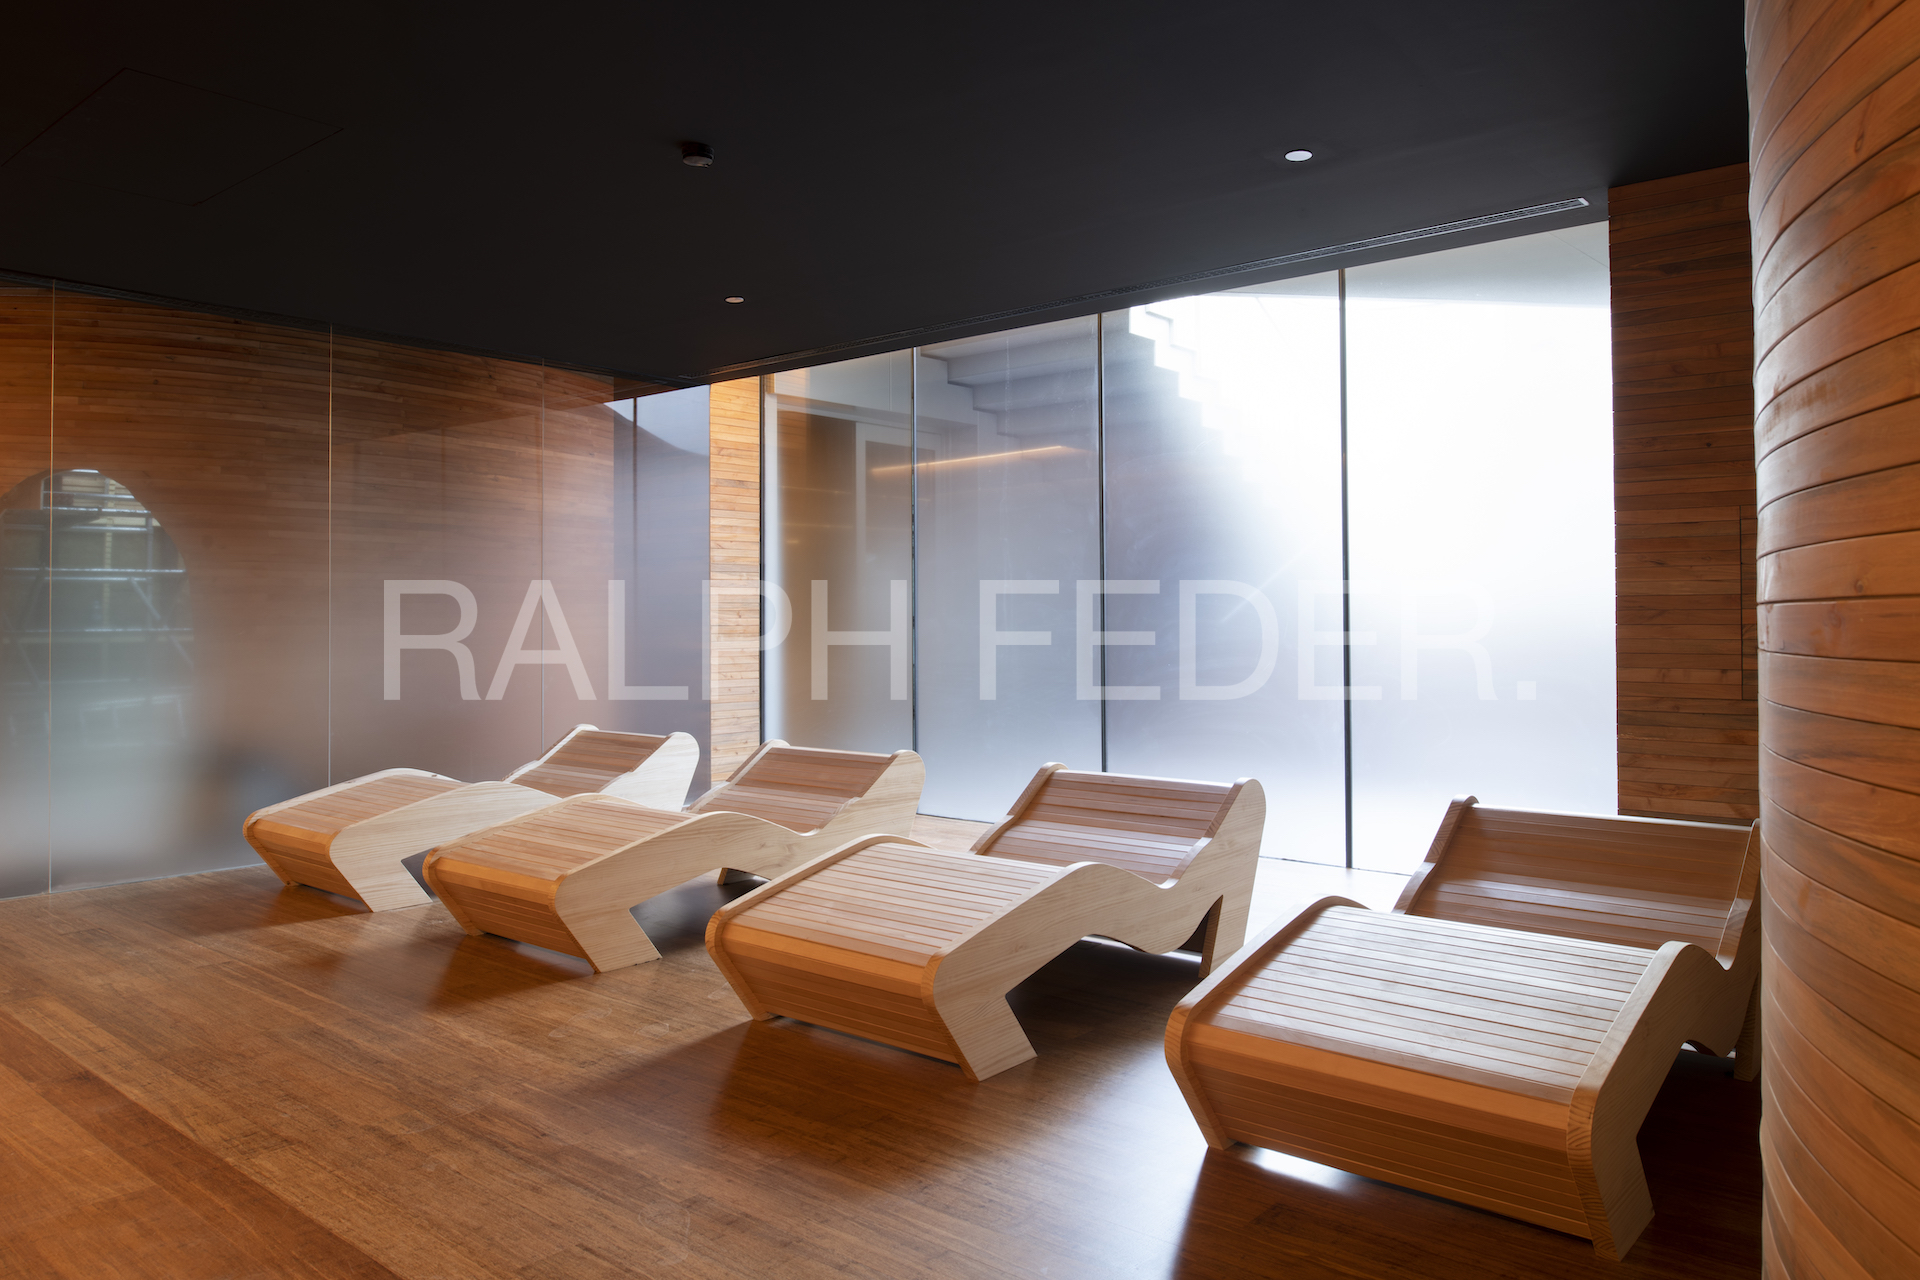 Spa Relaxation Room